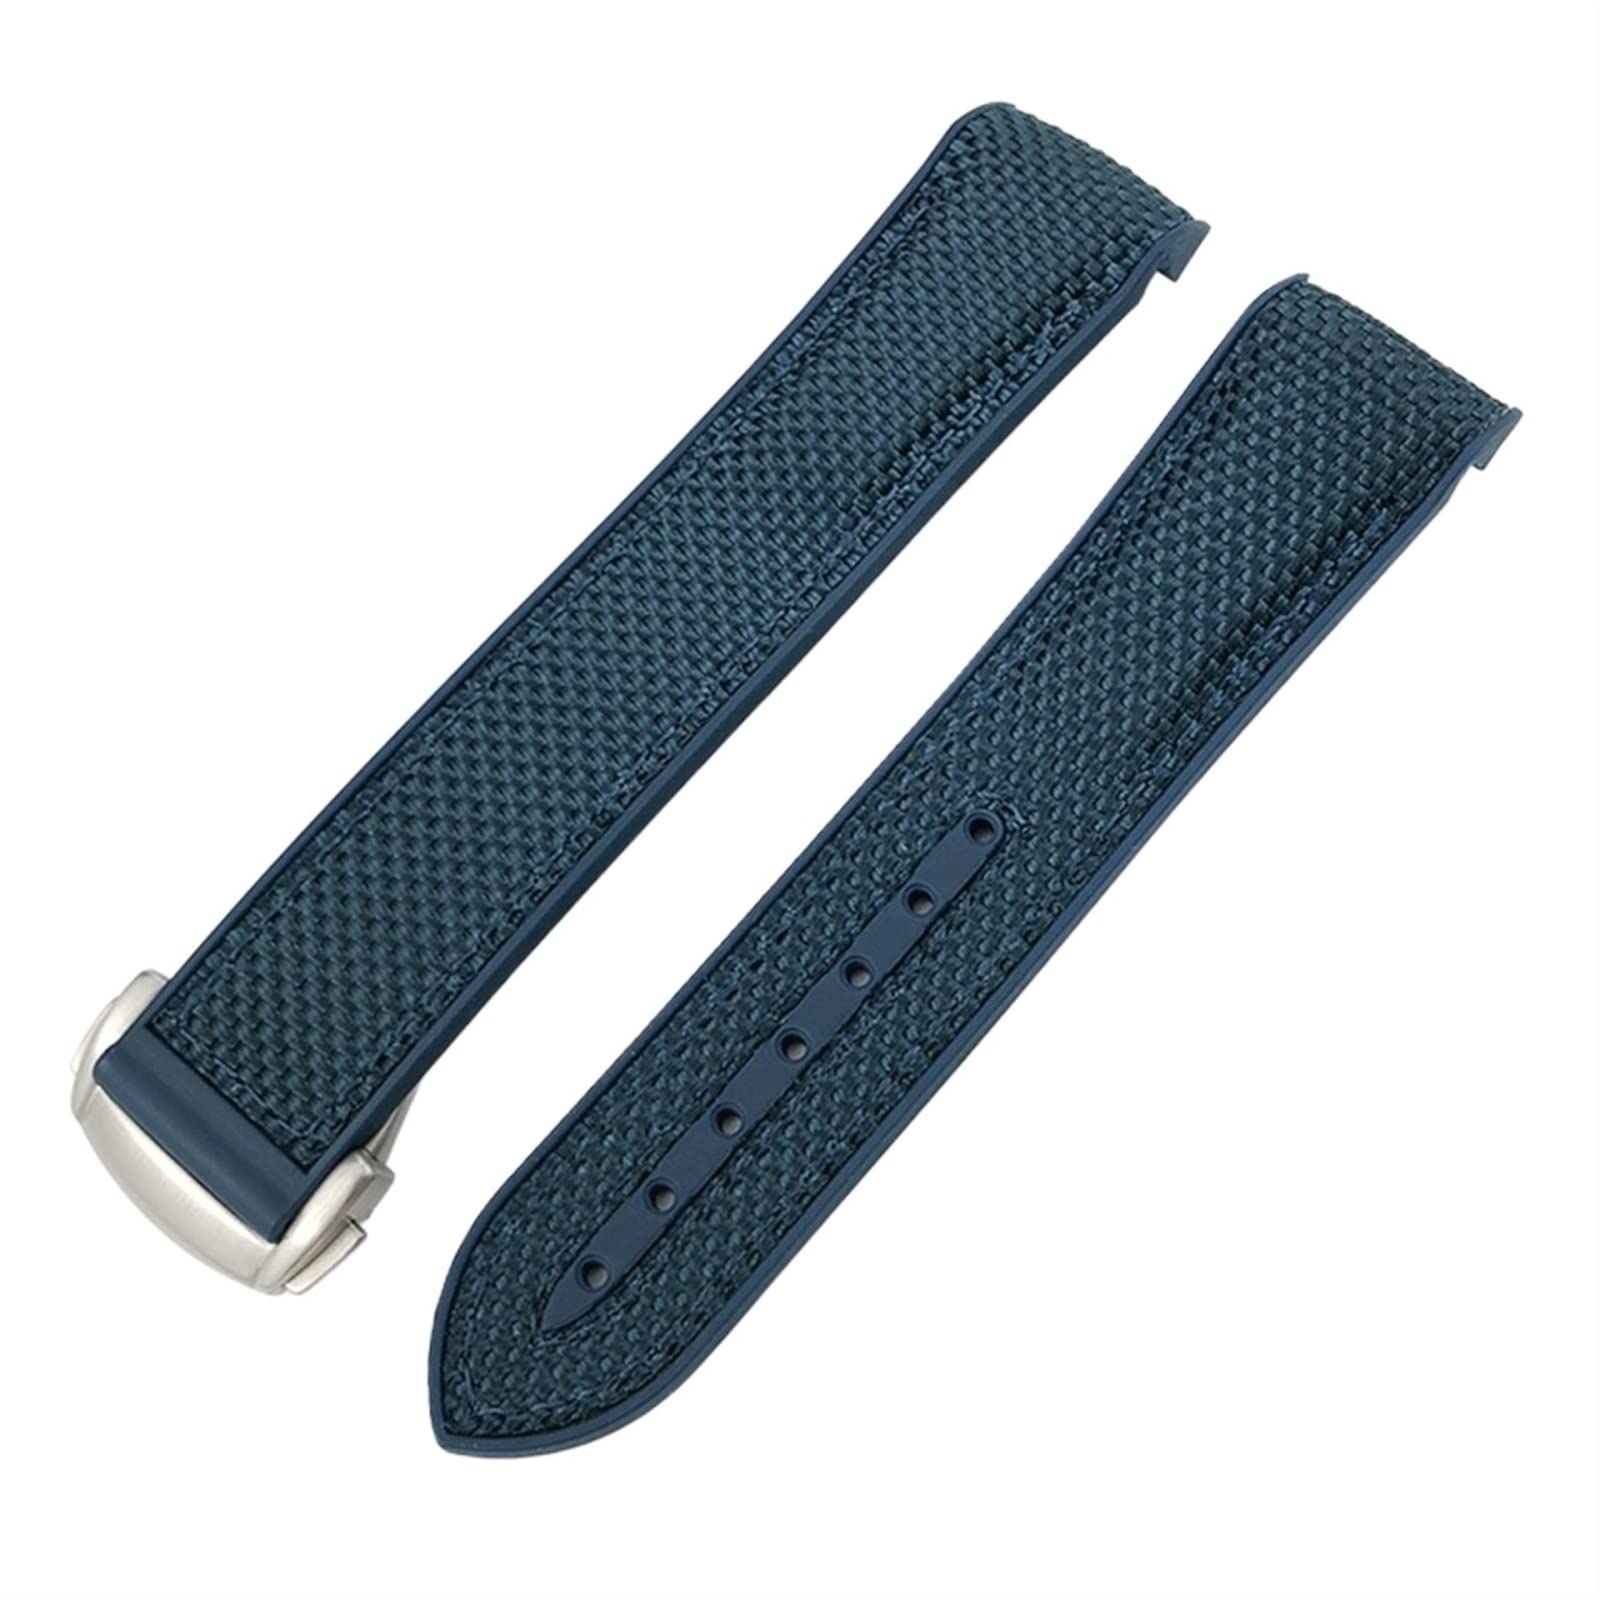 JWTPRO 19mm 20mm Nylon Rubber Watchband 21mm 22mm for Omega Seamaster 300 AT150 Speedmaster 8900 PlanetOcean Seiko Leather Strap (Color : Blue Nylon Bule, Size : 22mm)